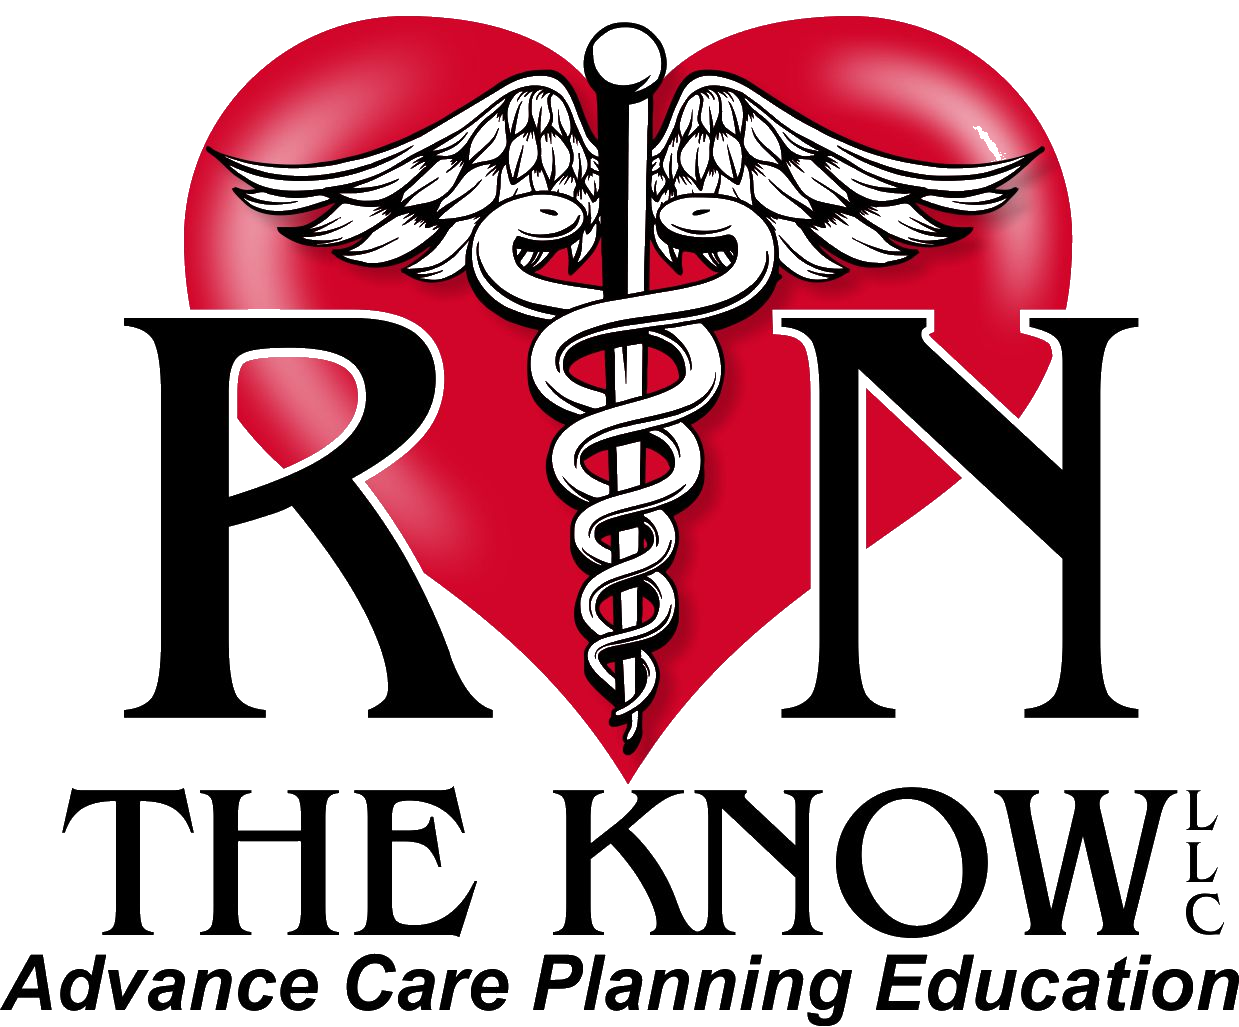 RN the Know Advance Care Planning Education